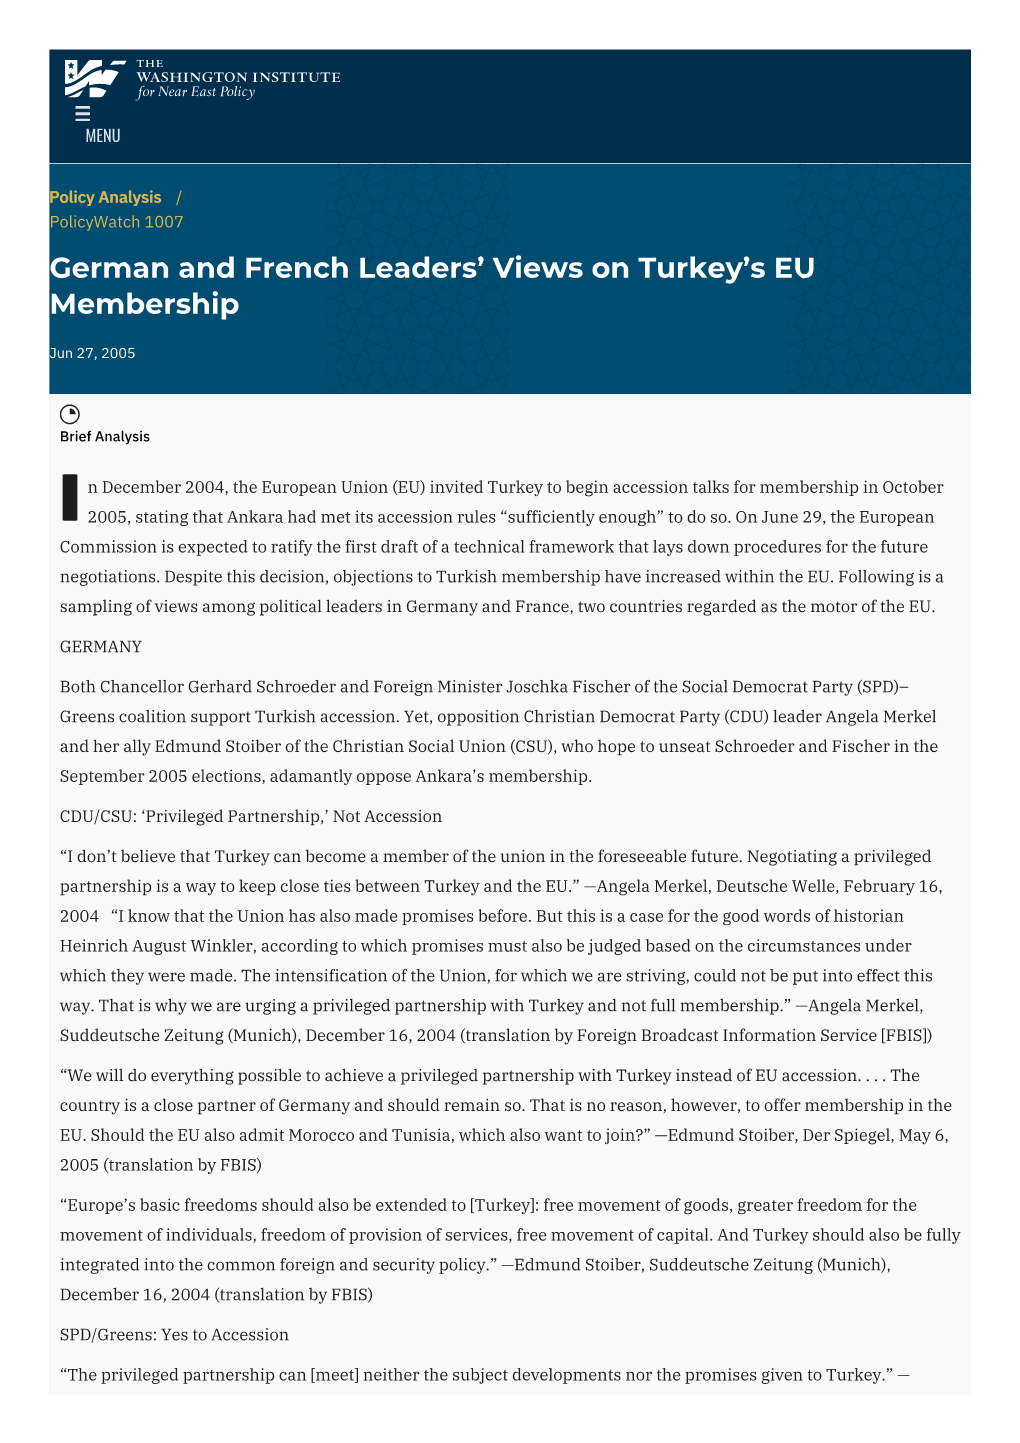 German and French Leaders' Views On